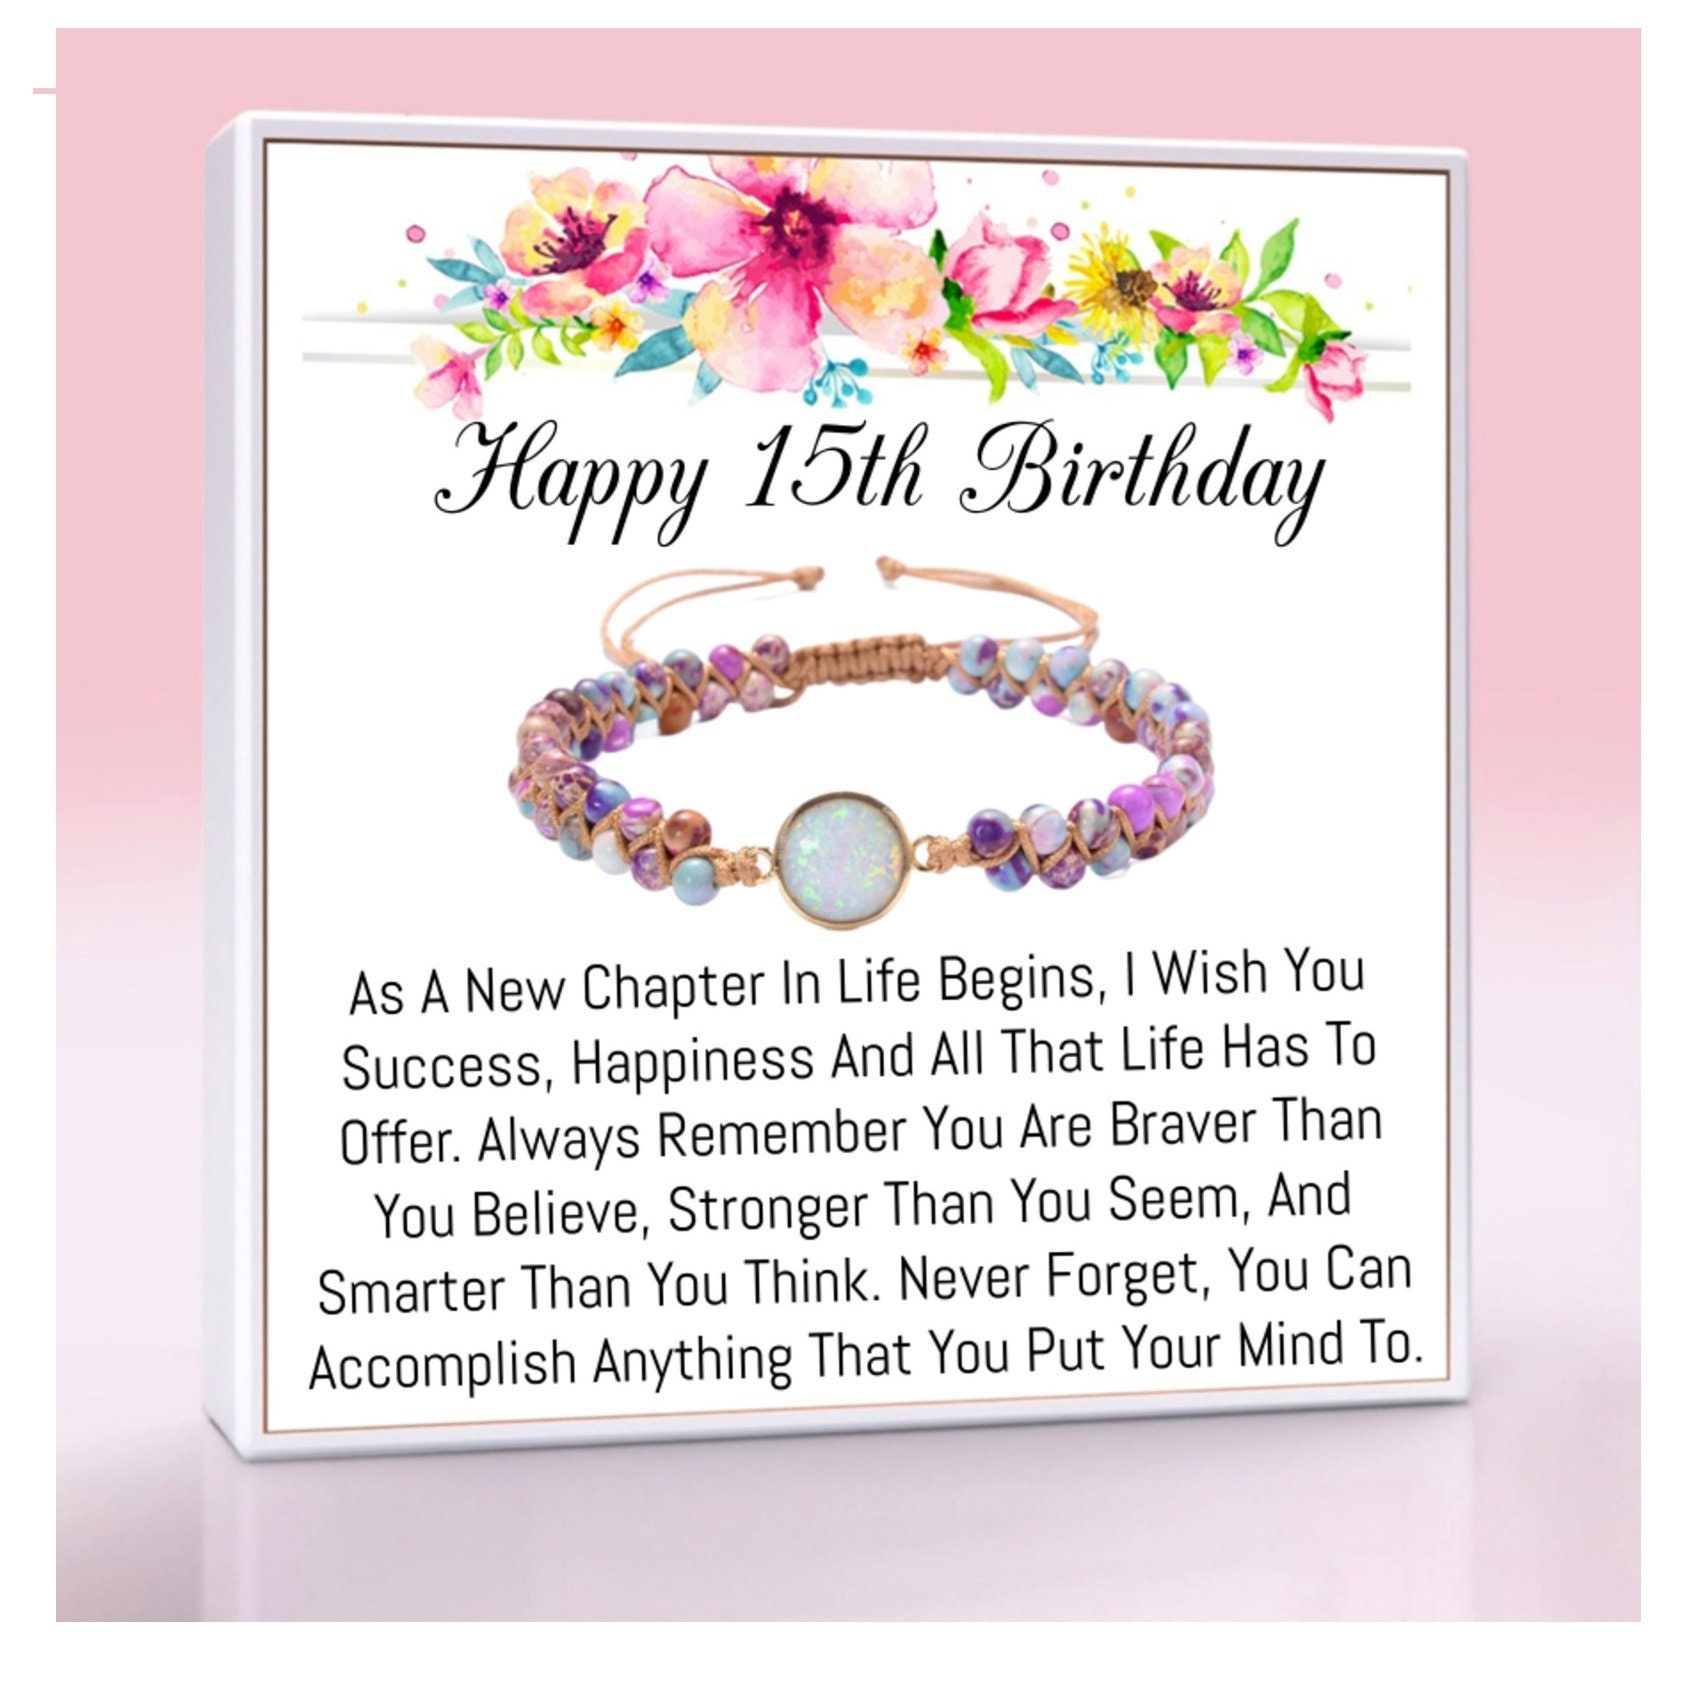 Custom 15th Birthday Jewelry 15th Birthday Gift for Her Gifts for